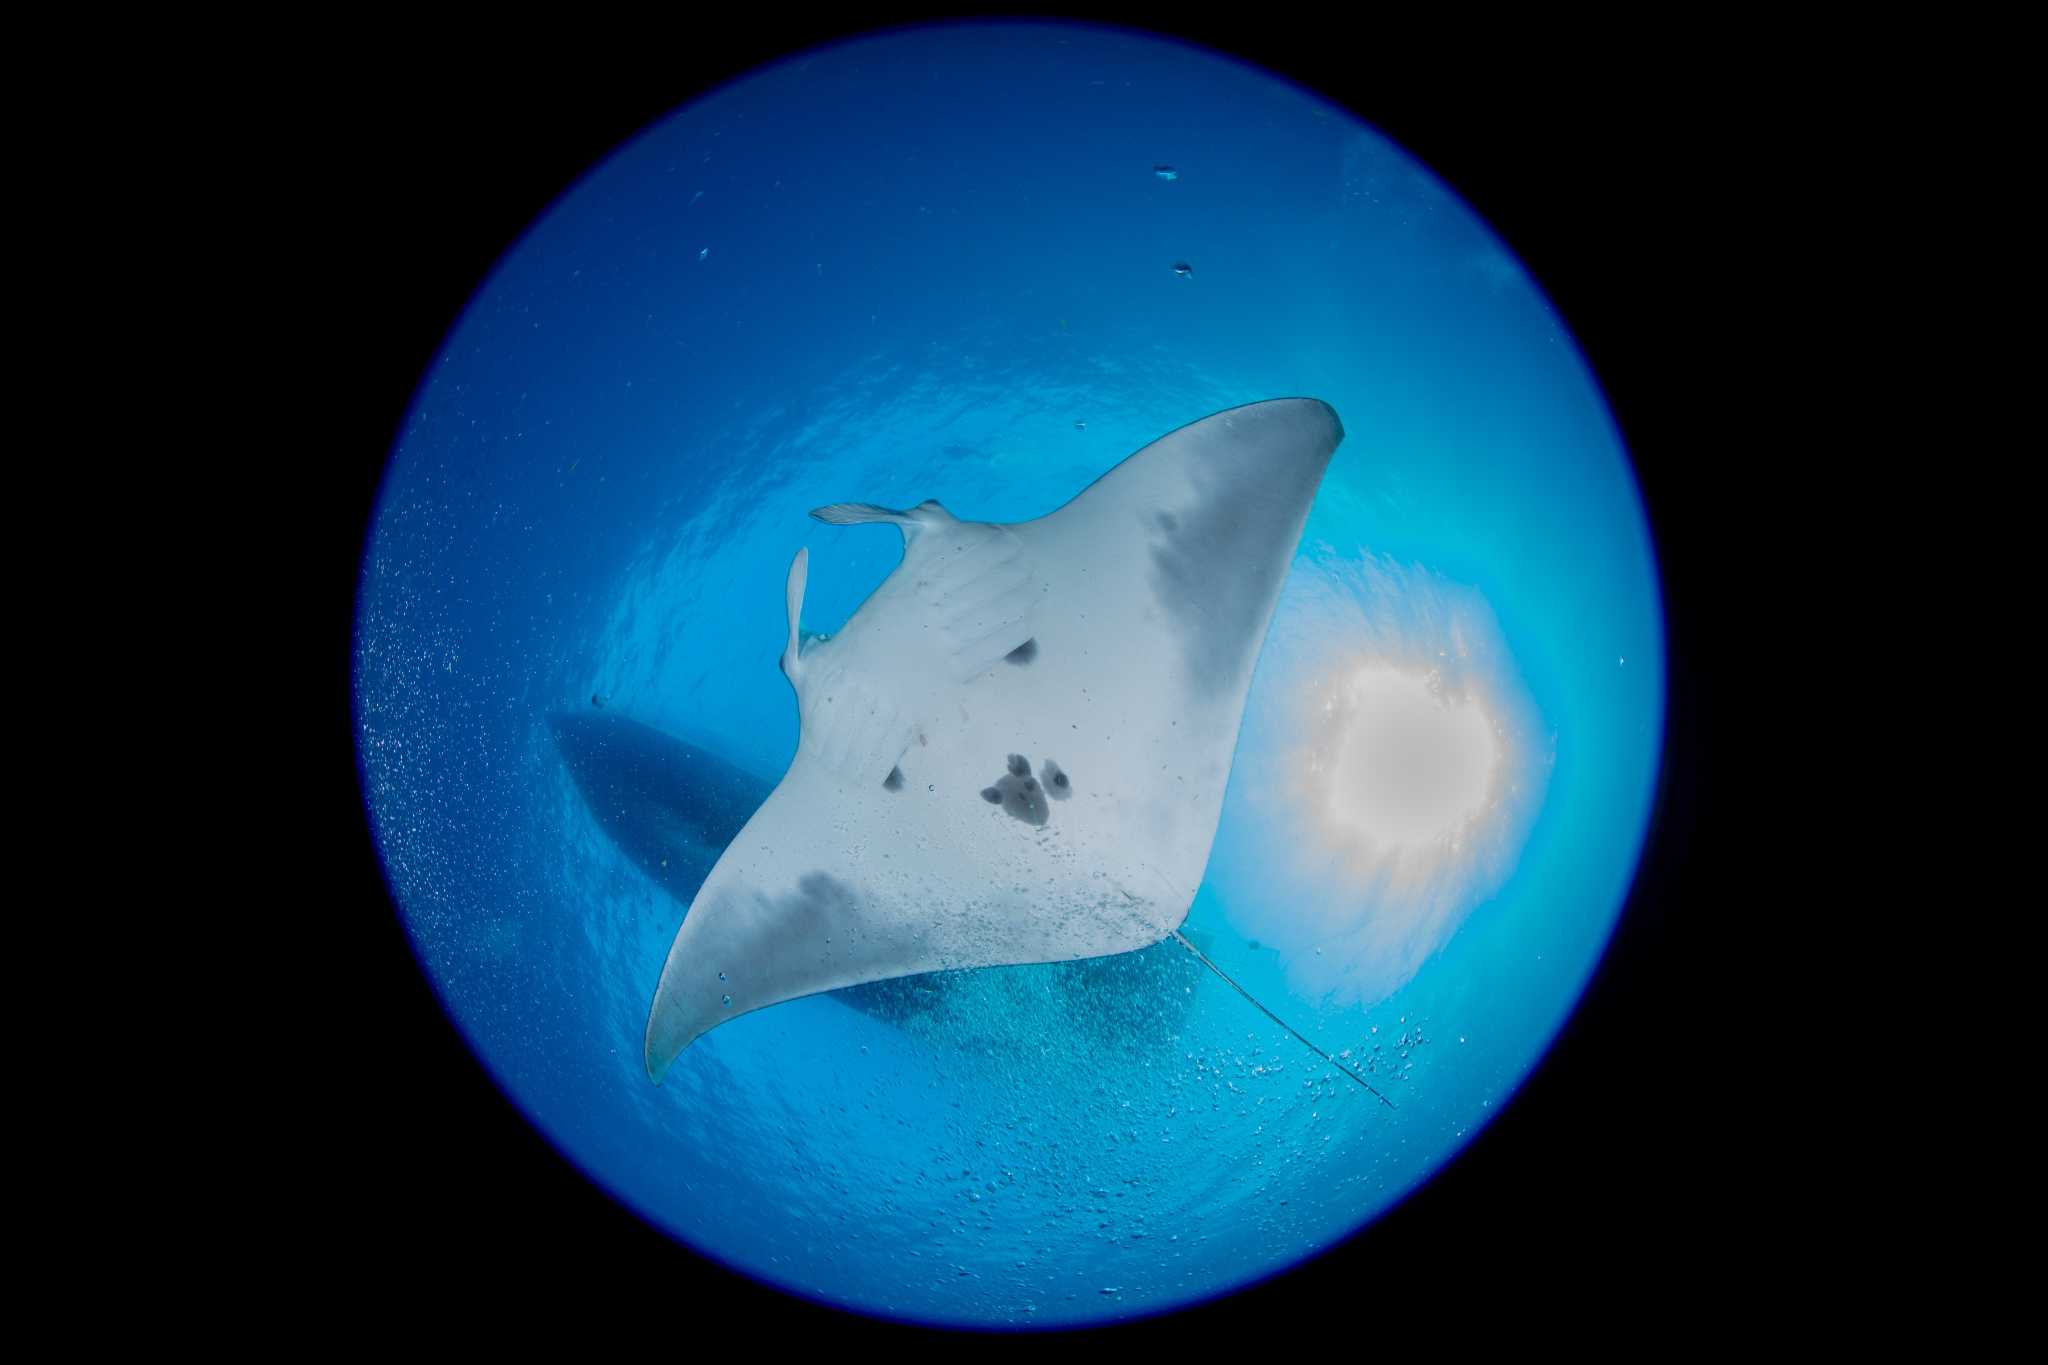 New Study Makes Big Splash in Manta Ray Conservation, Nature and Wildlife